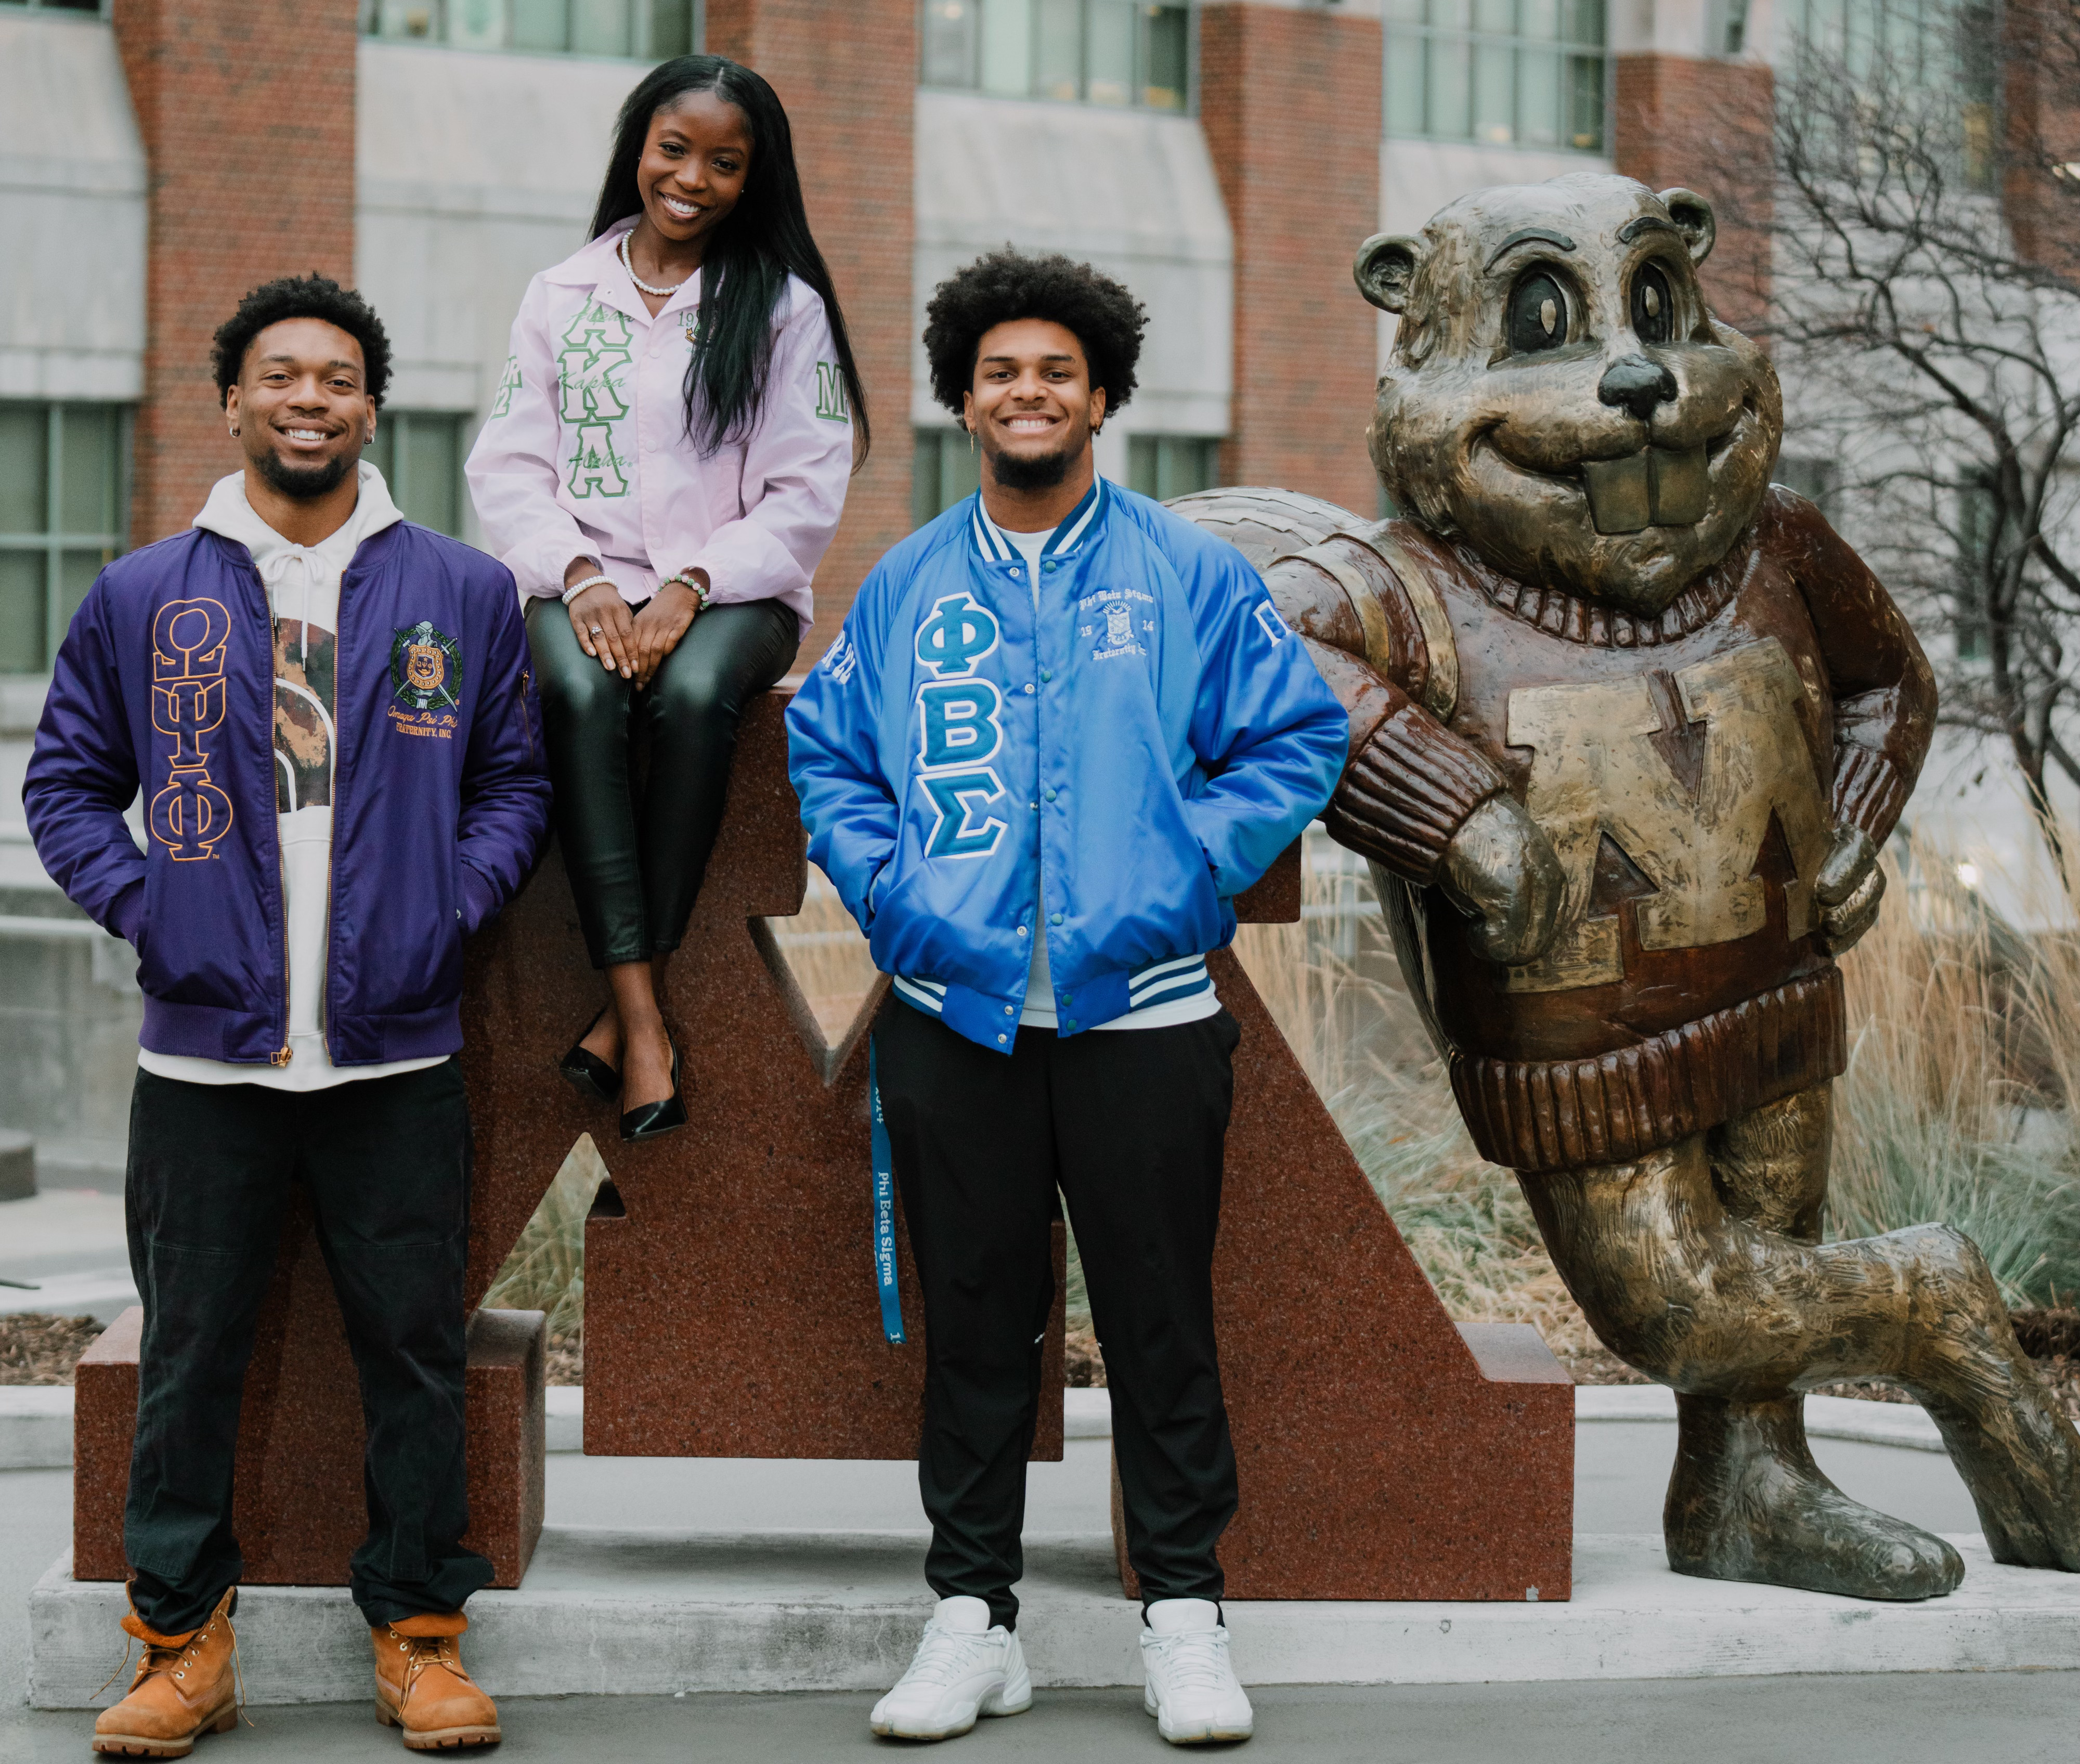 NPHC group photo at the Goldy Gopher statue in front of CMU